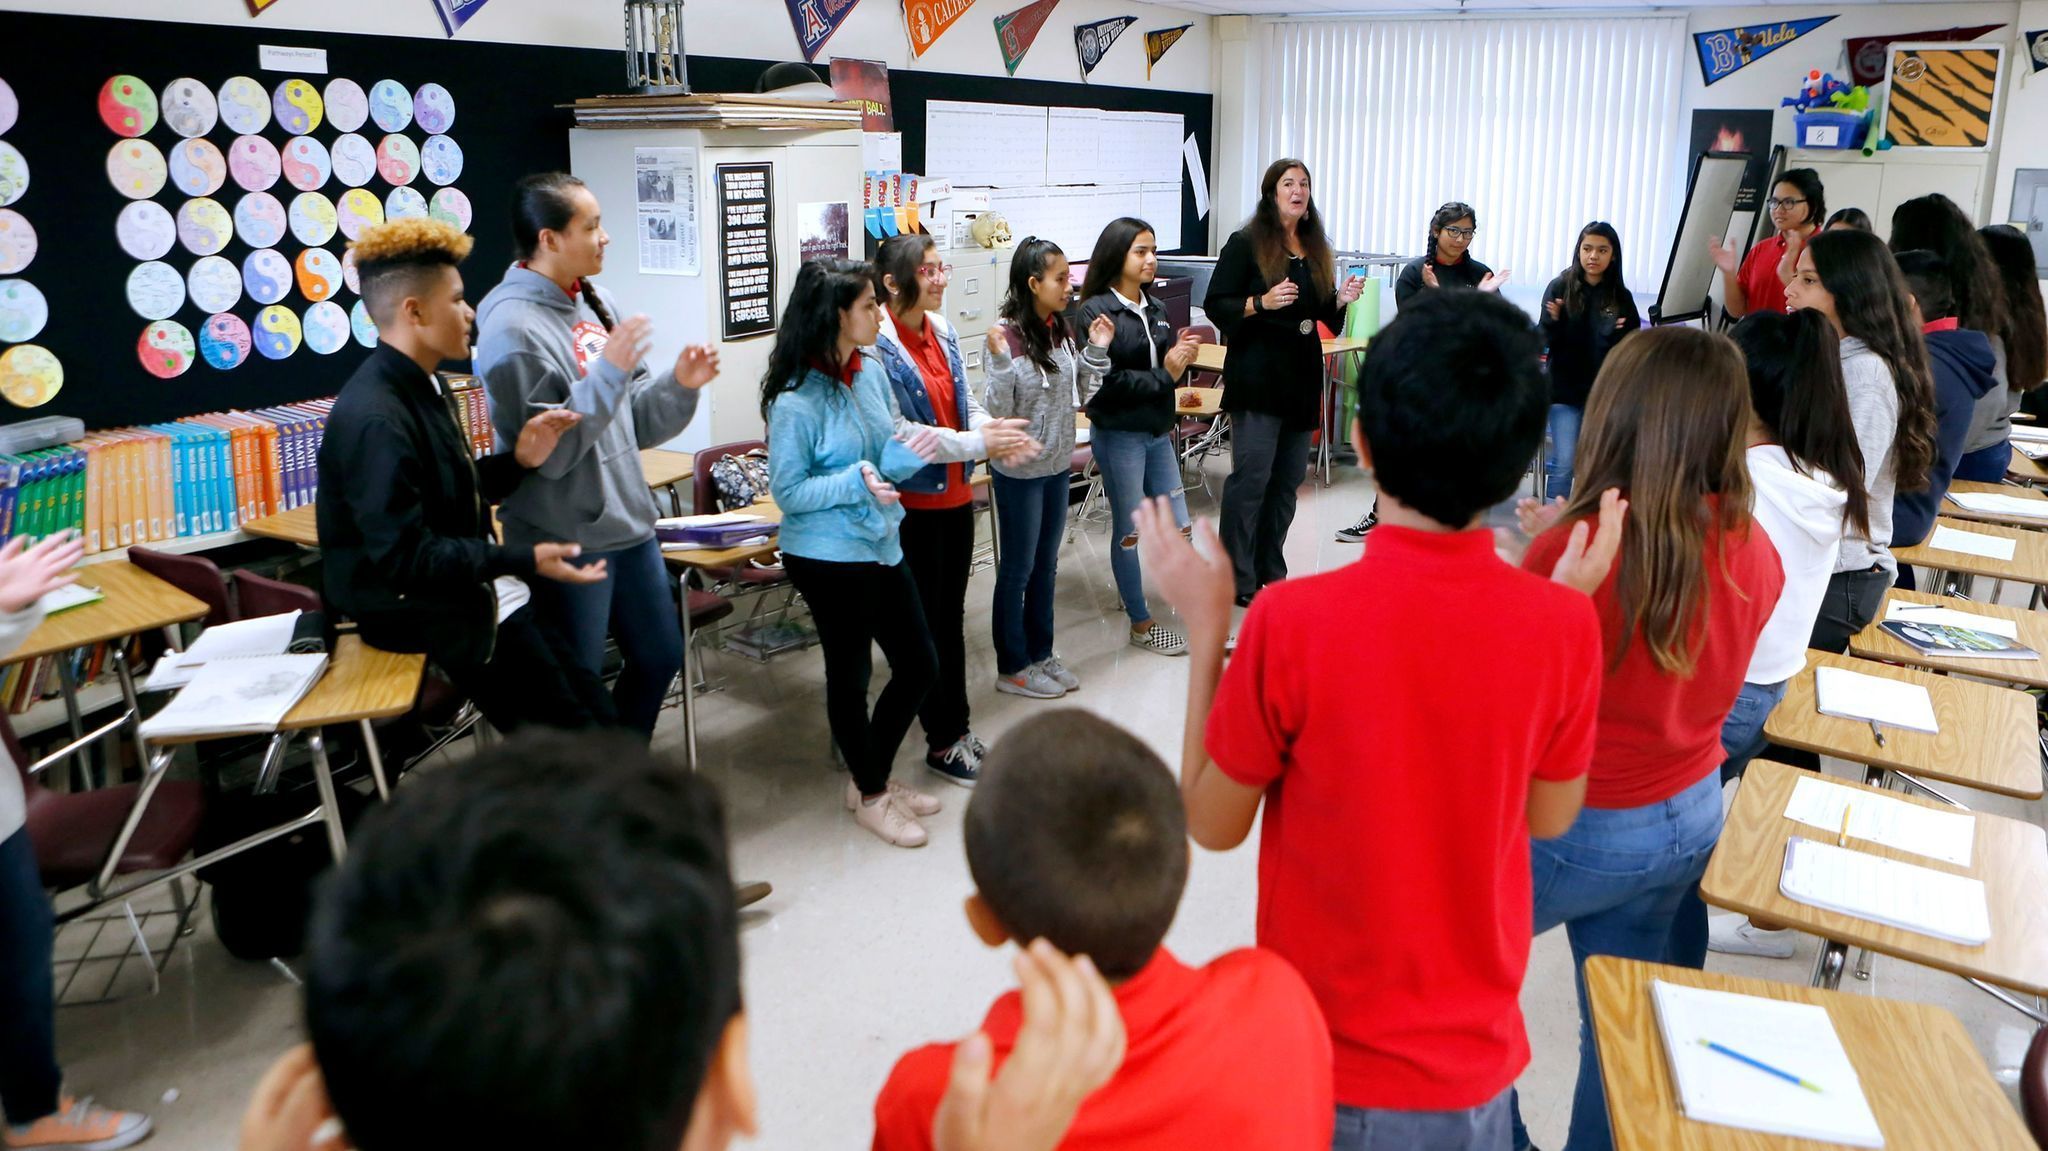 Roosevelt Middle School teachers use alternative methods to help students manage, express their emotions and behaviors